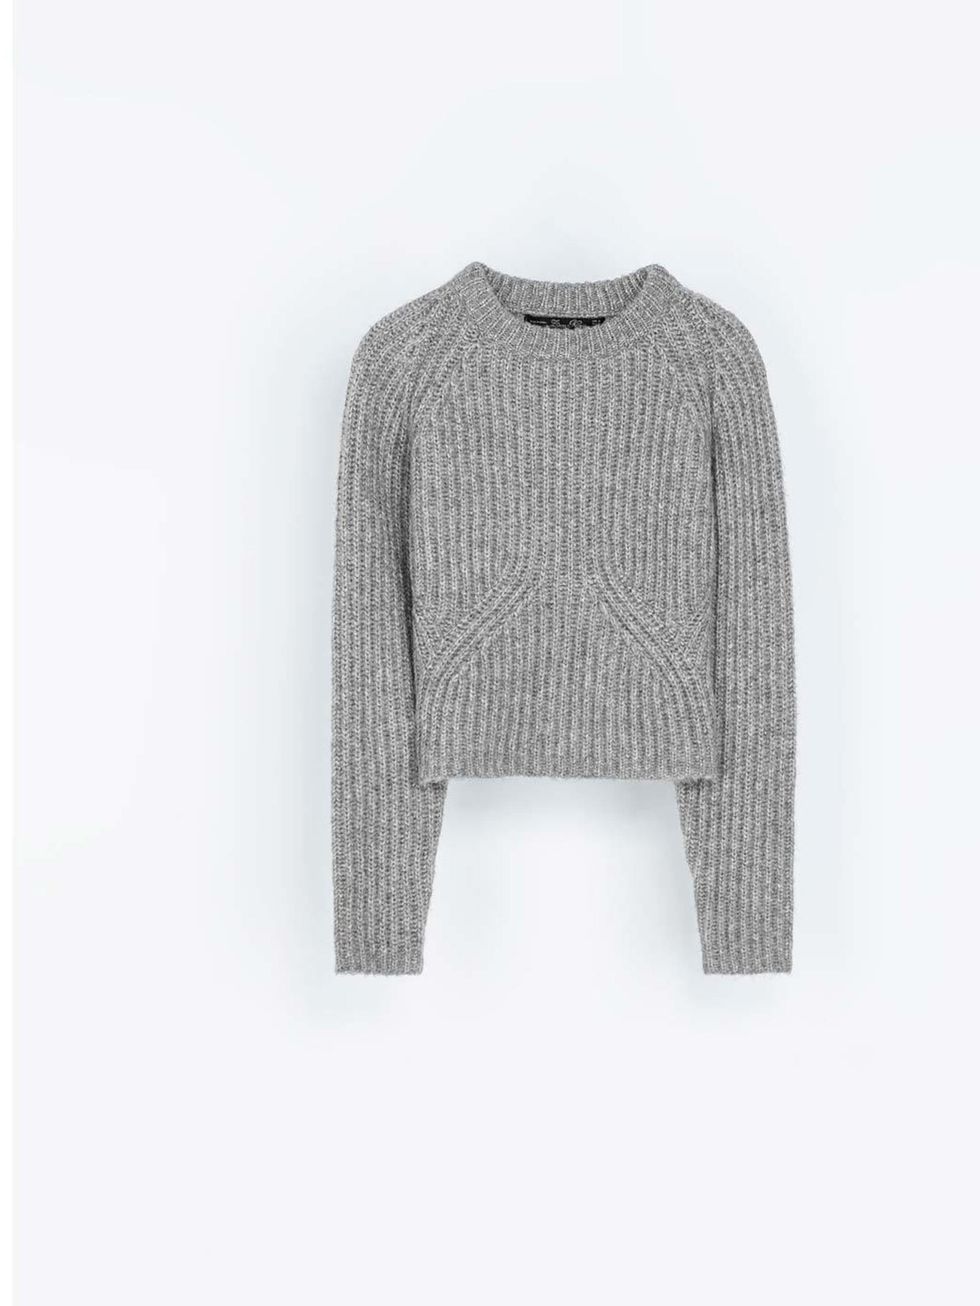 <p>A knitted cropped jumper is always a good option for layering up the look.</p><p><a href="http://www.zara.com/uk/en/new-this-week/woman/cowl-neck-rib-knit-sweater-c287002p1404504.html">Zara</a>, £45.99</p>